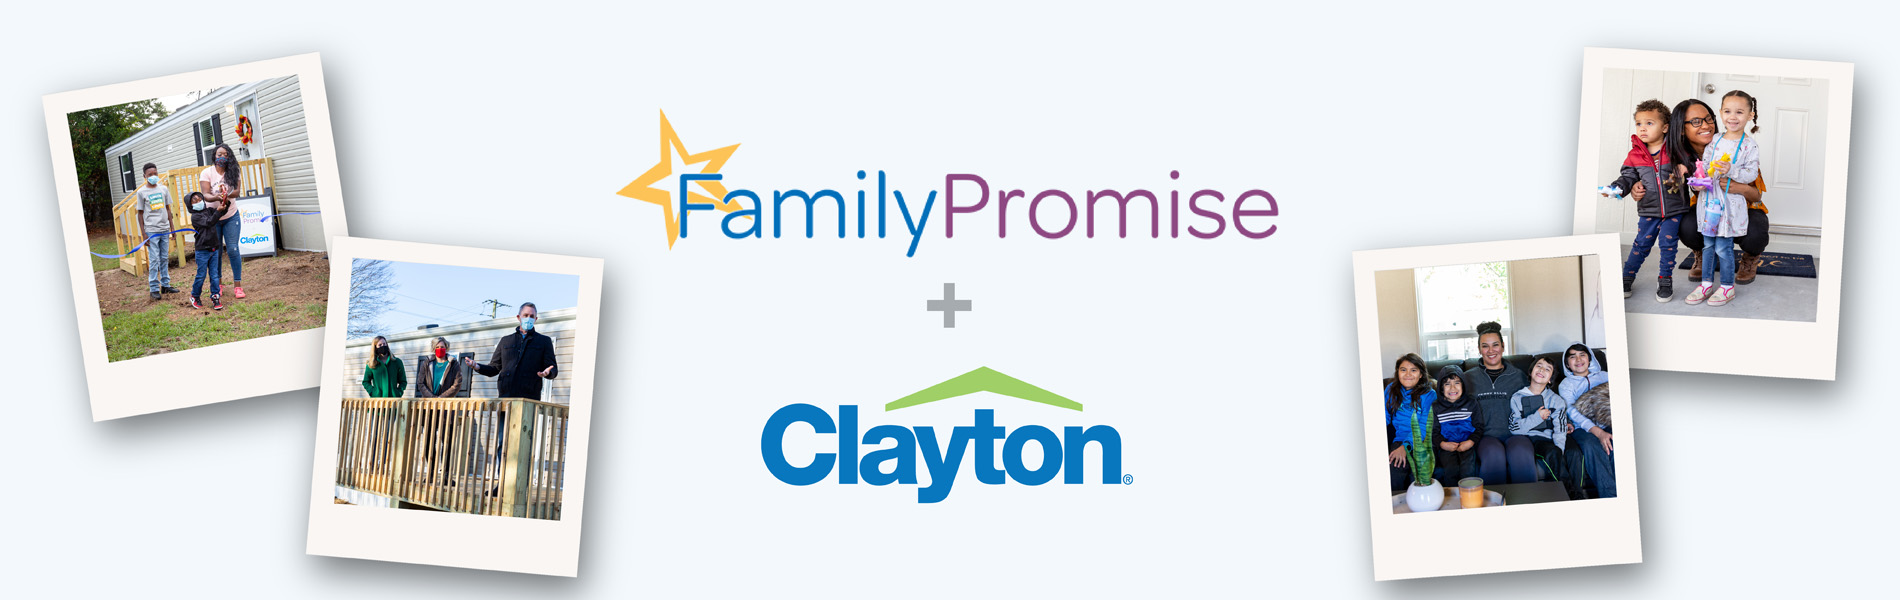 Family Promise and Clayton